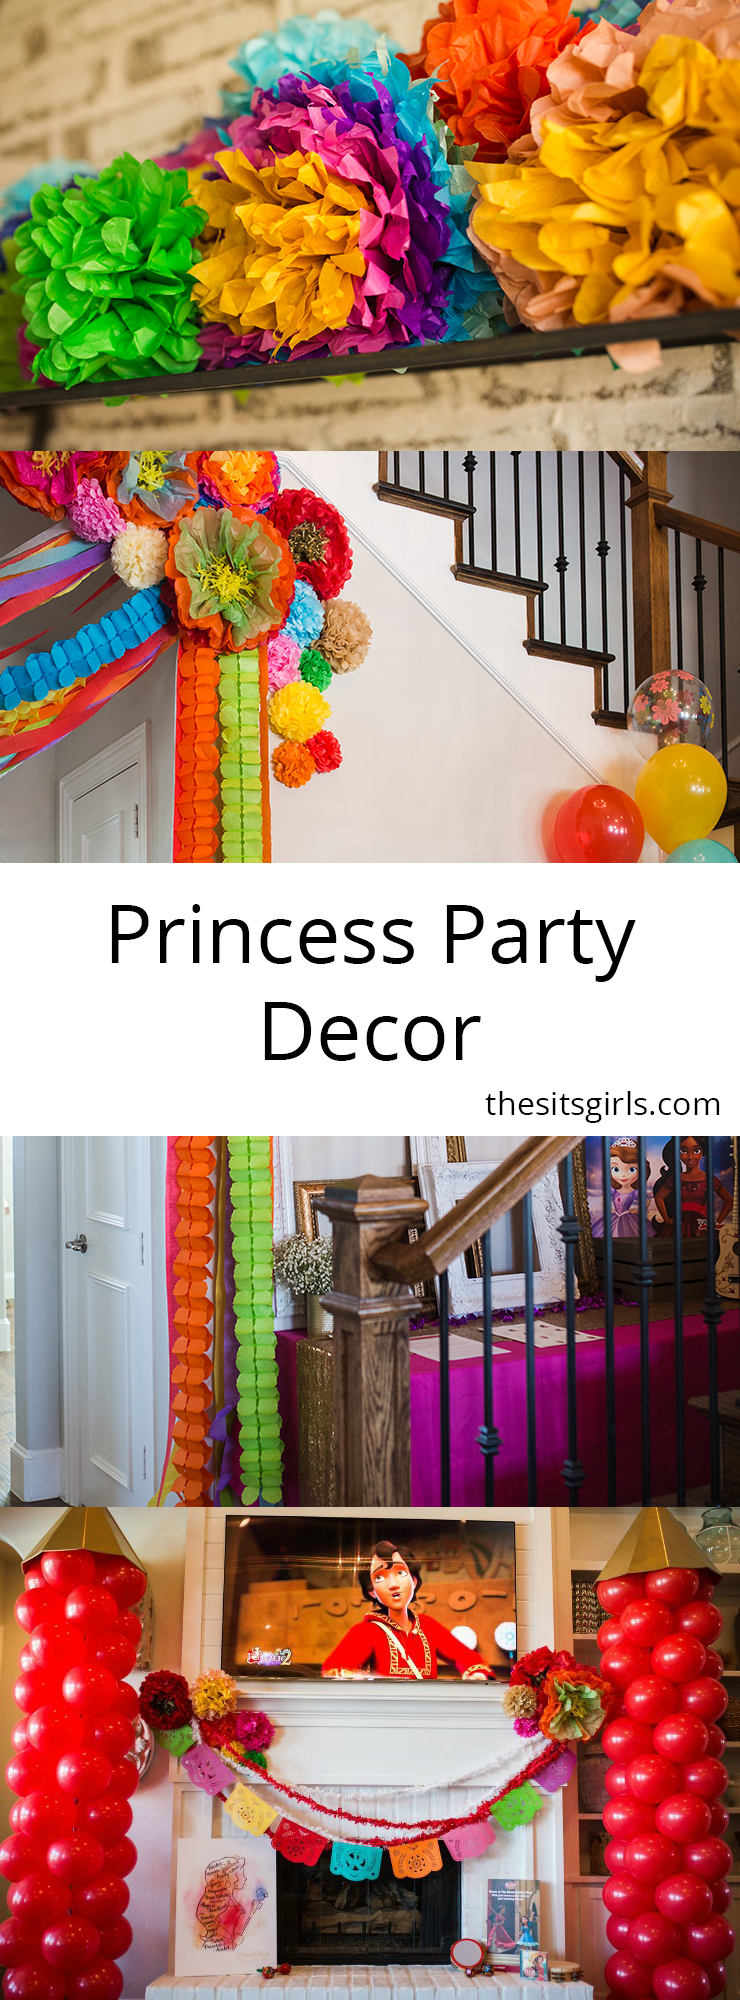 Princess Party Decor | Great princess party ideas for an Elena party or a Sofia the First party.